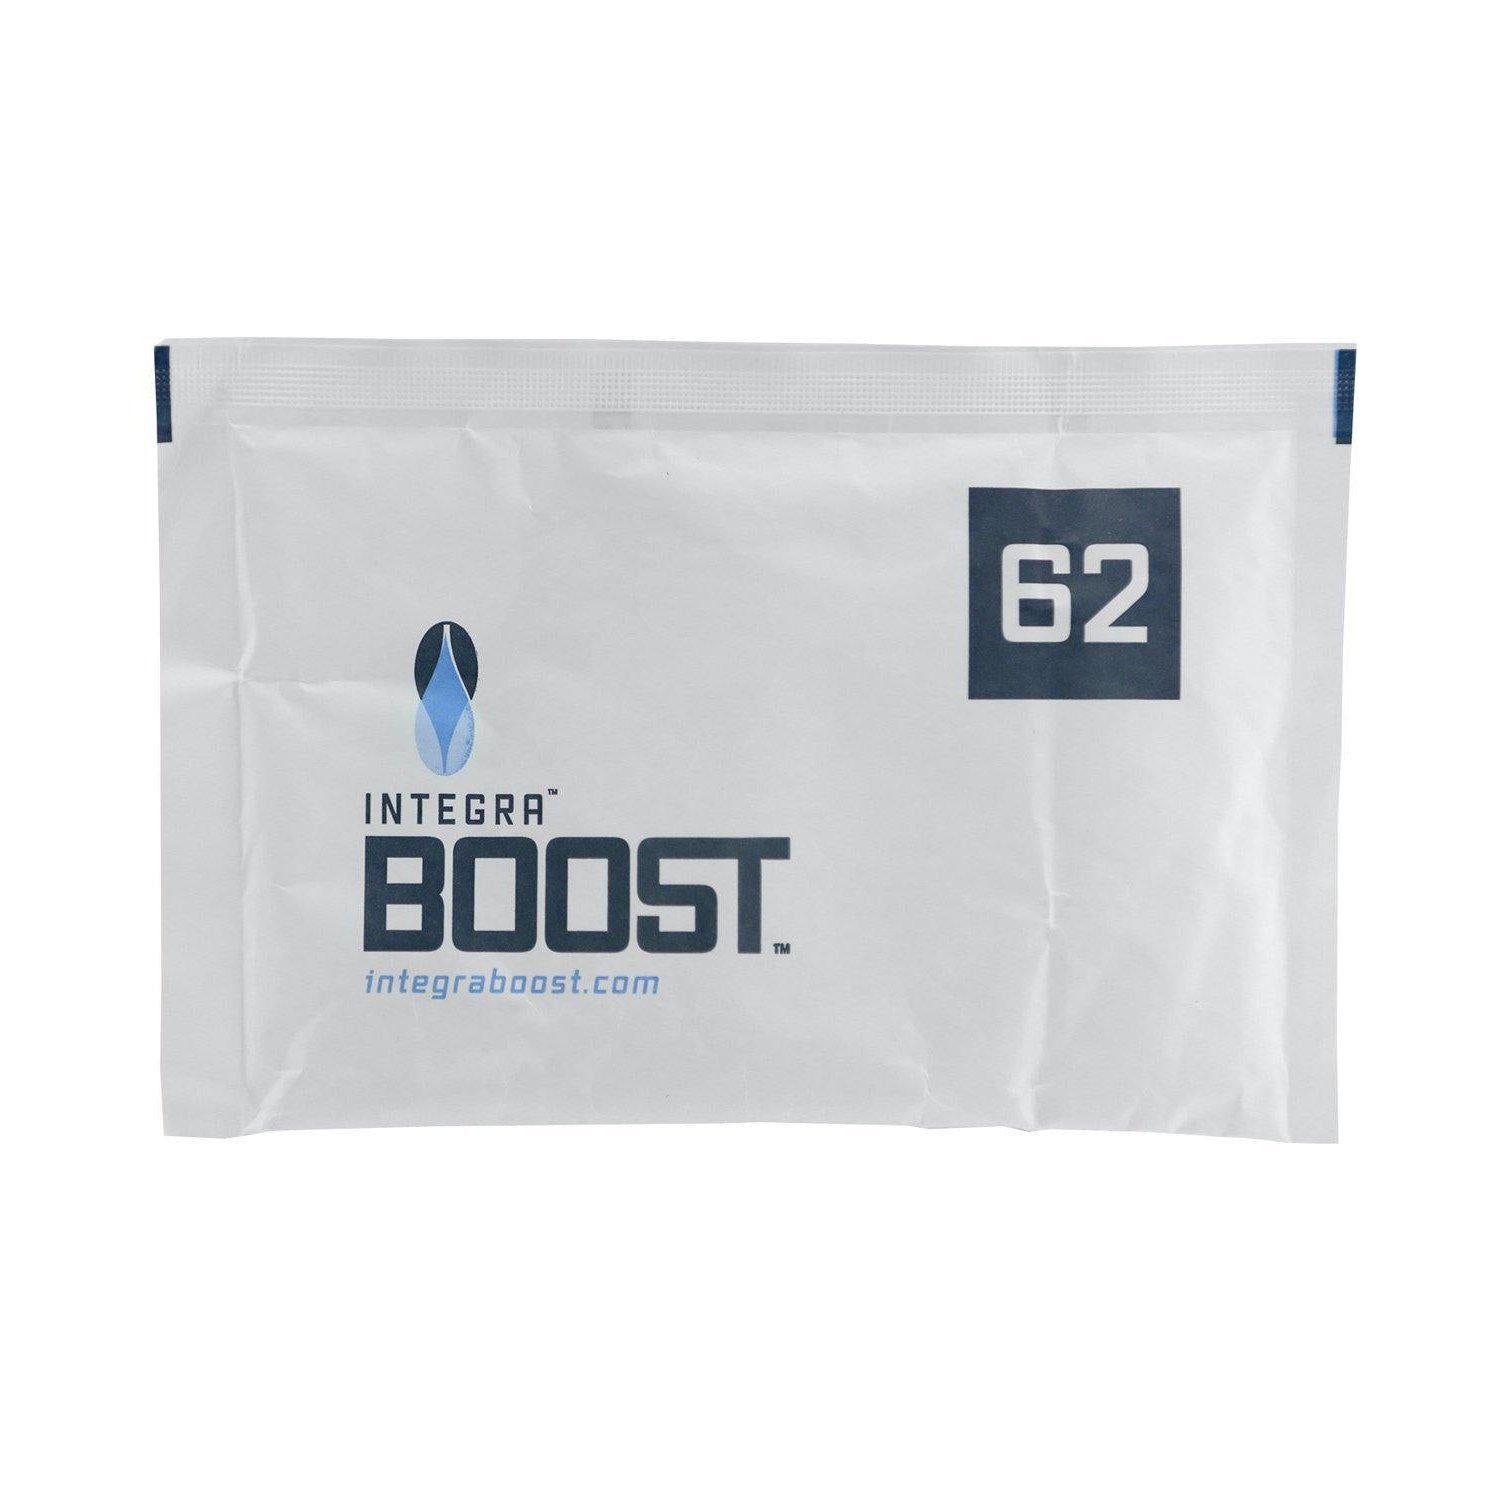 Accessories - Humidiccant / Humidity Packets by Integra Boost - 802359000553- Gardin Warehouse